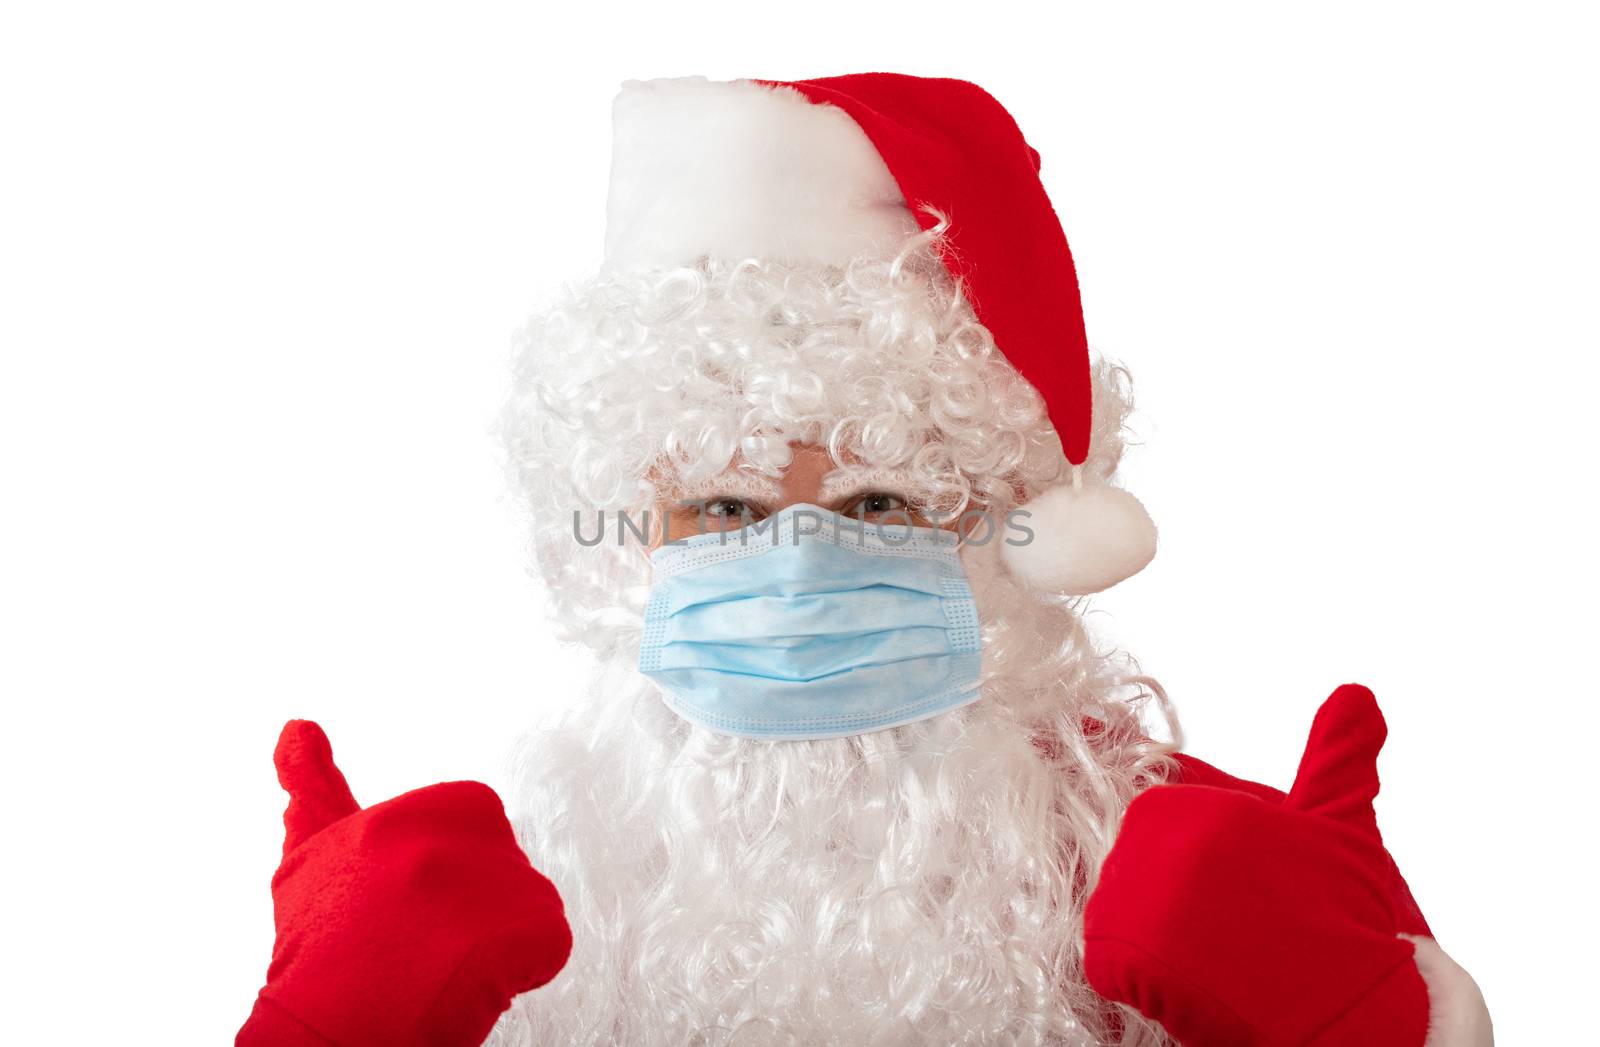 View of a man wearing a Santa Claus costume and medical mask with his thumbs up, isolated on white background. Man looks straight in the camera and is stressed. New normal, pandemic holiday concepts by DamantisZ